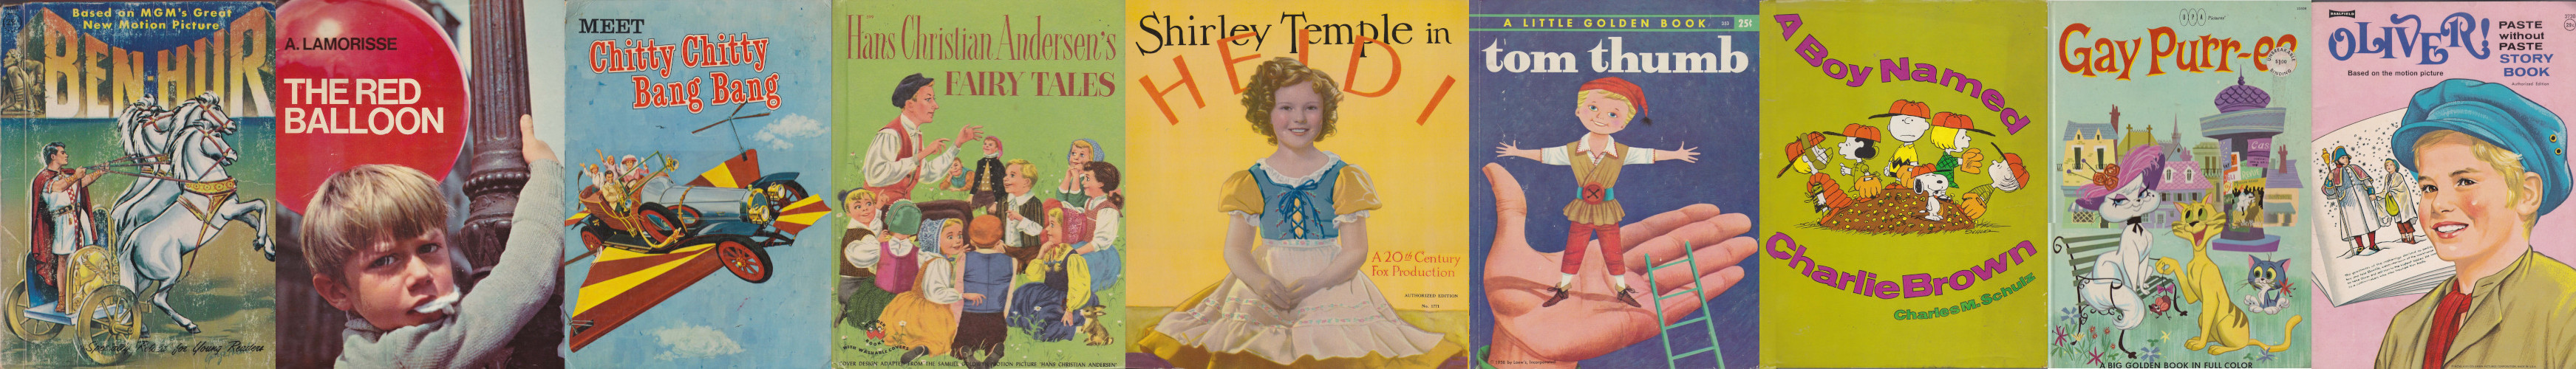 Children's PhotoPlay Editions Hardcover with Dustjacket